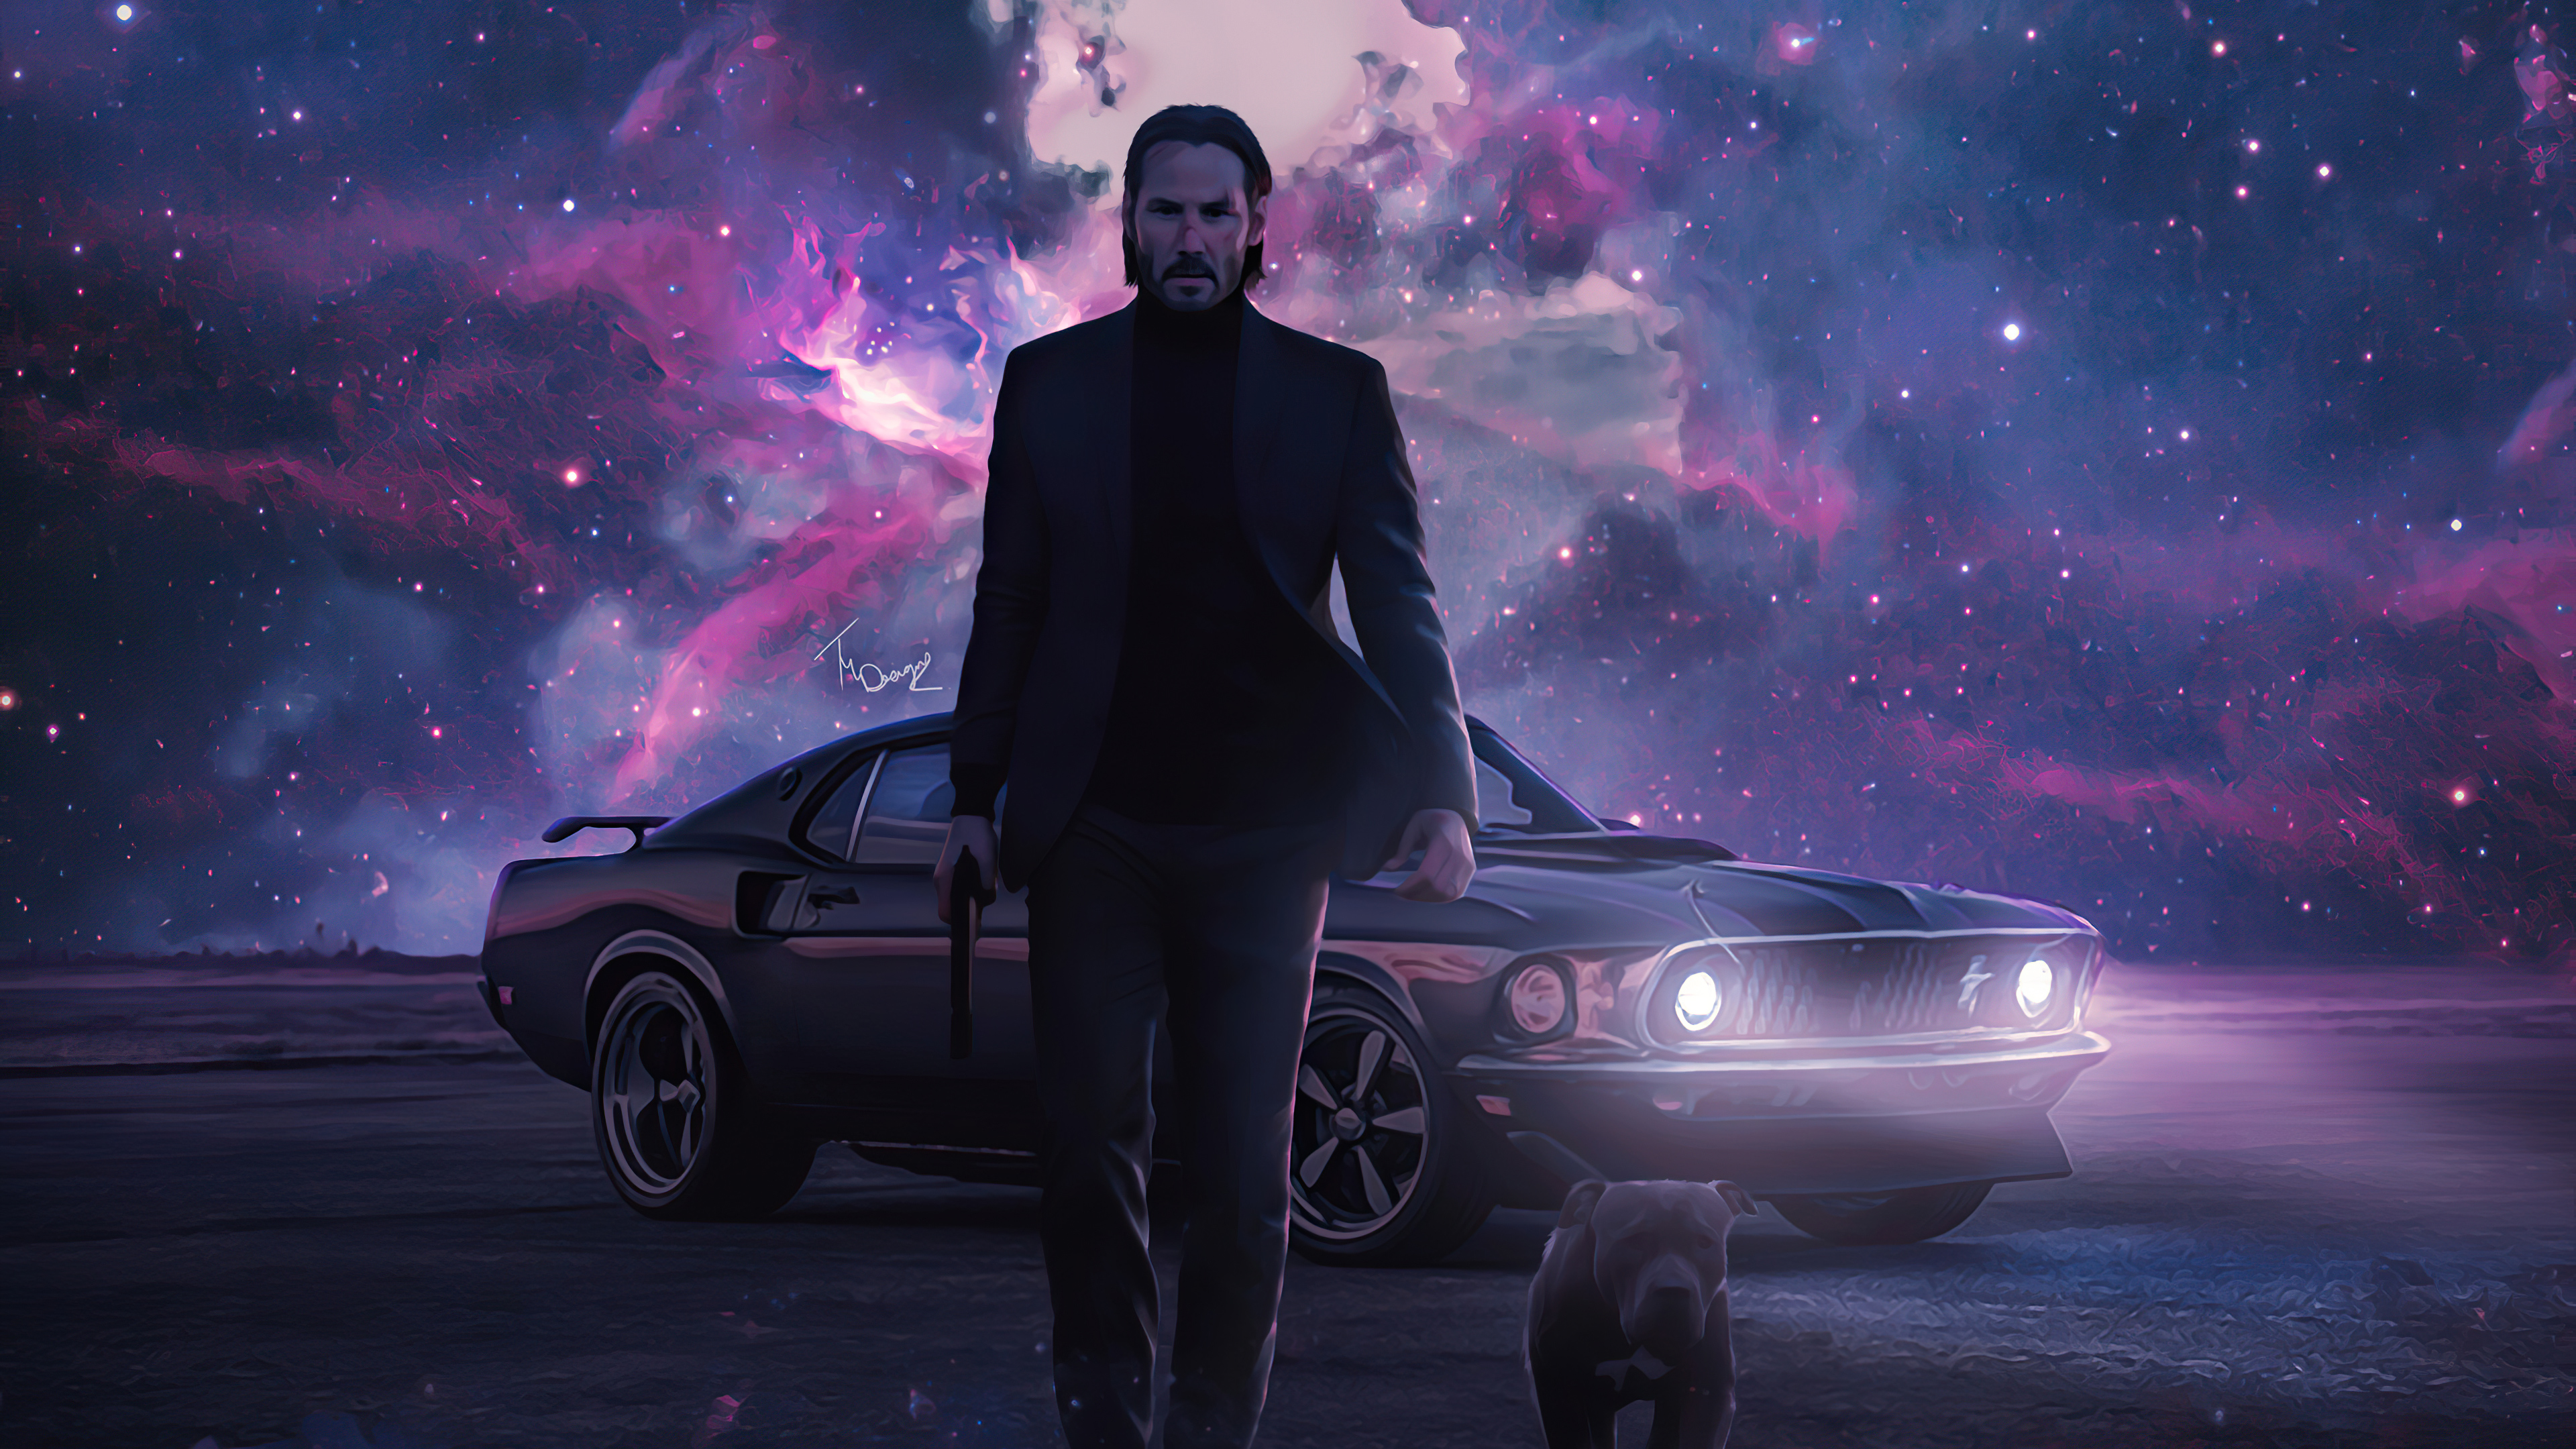 John Wick Dog 4k 2020, HD Movies, 4k Wallpapers, Images, Backgrounds